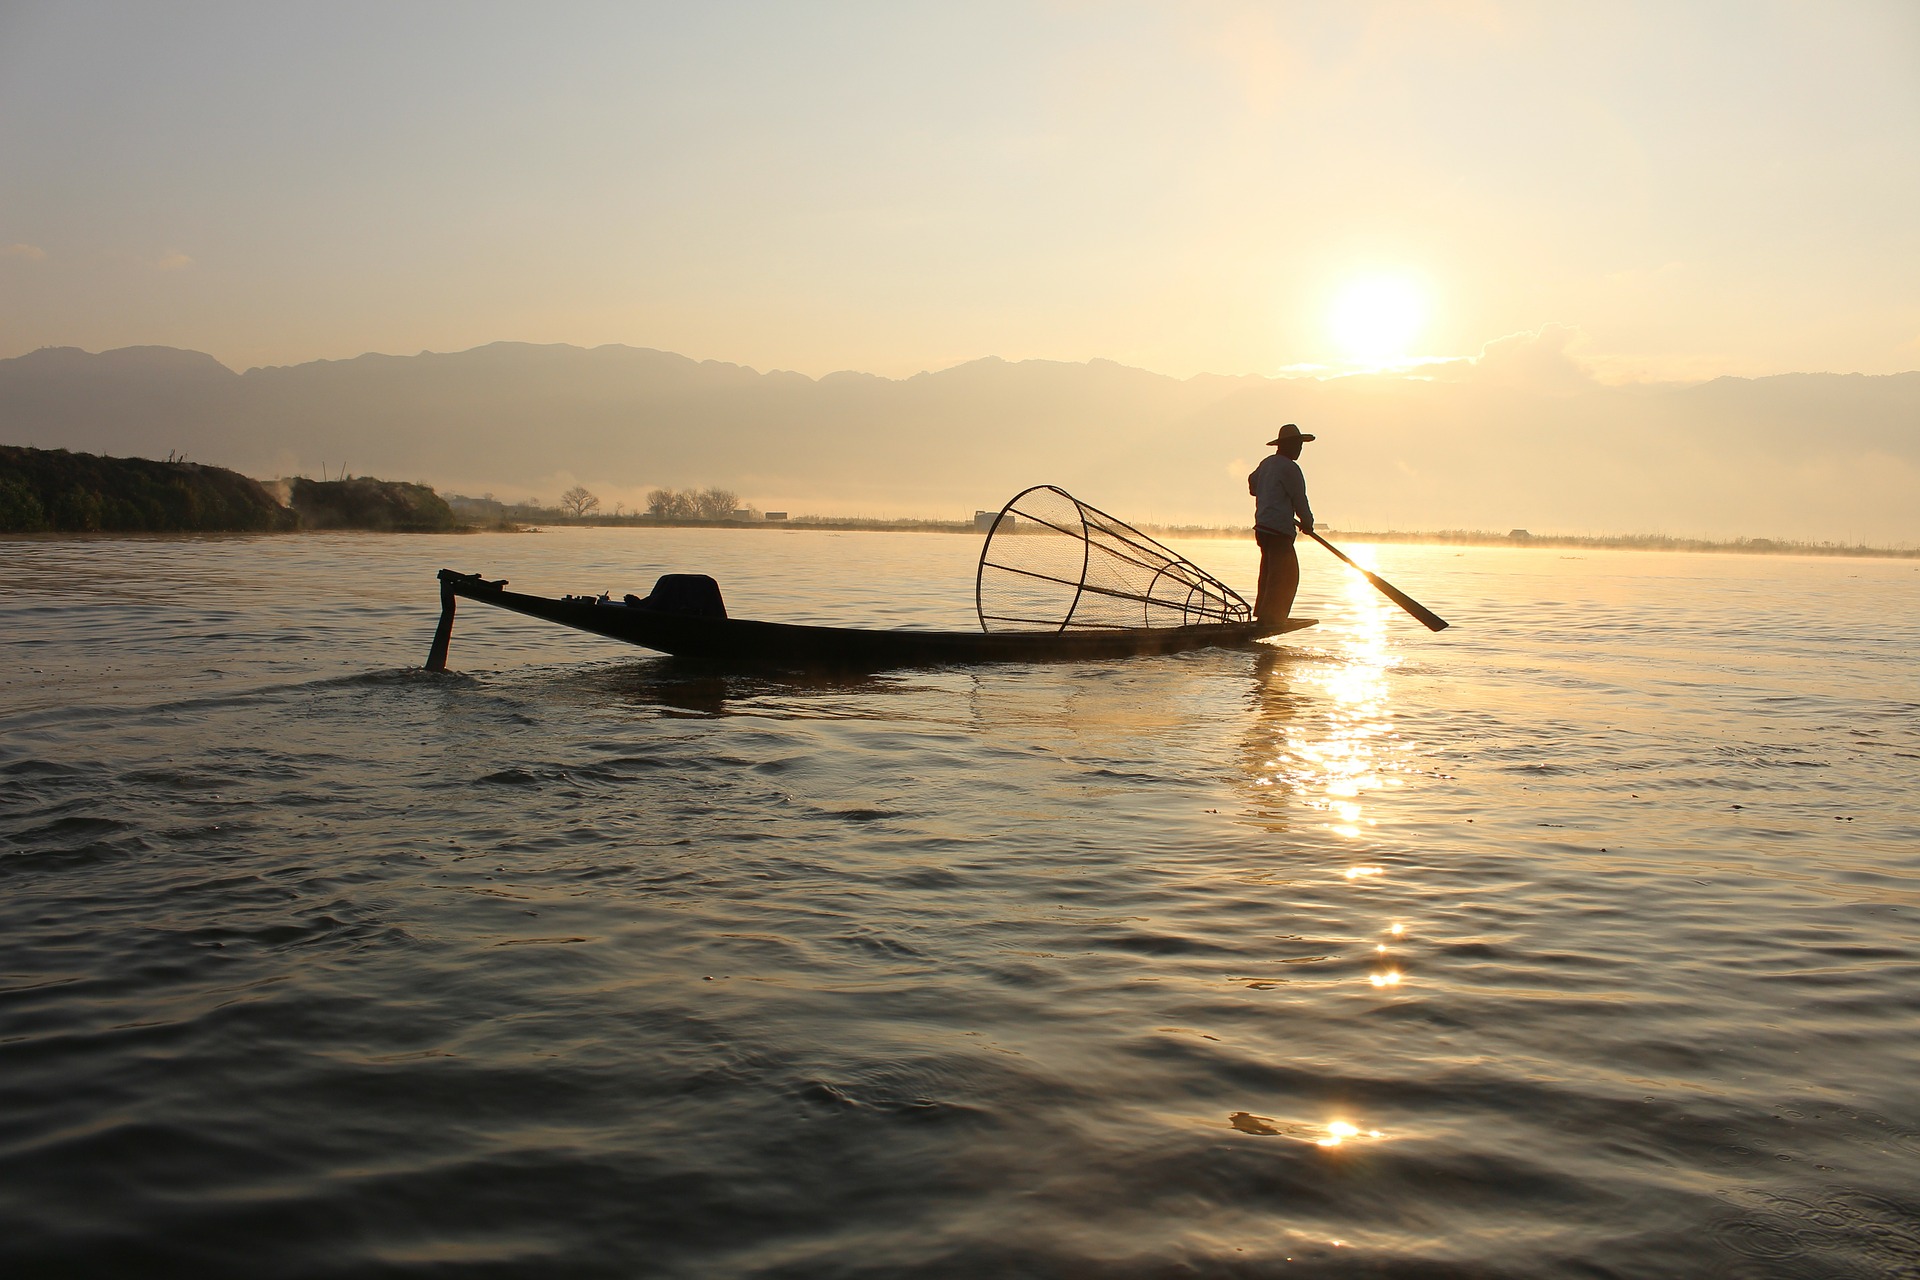 A fisherman in his boat on the Lake Inle